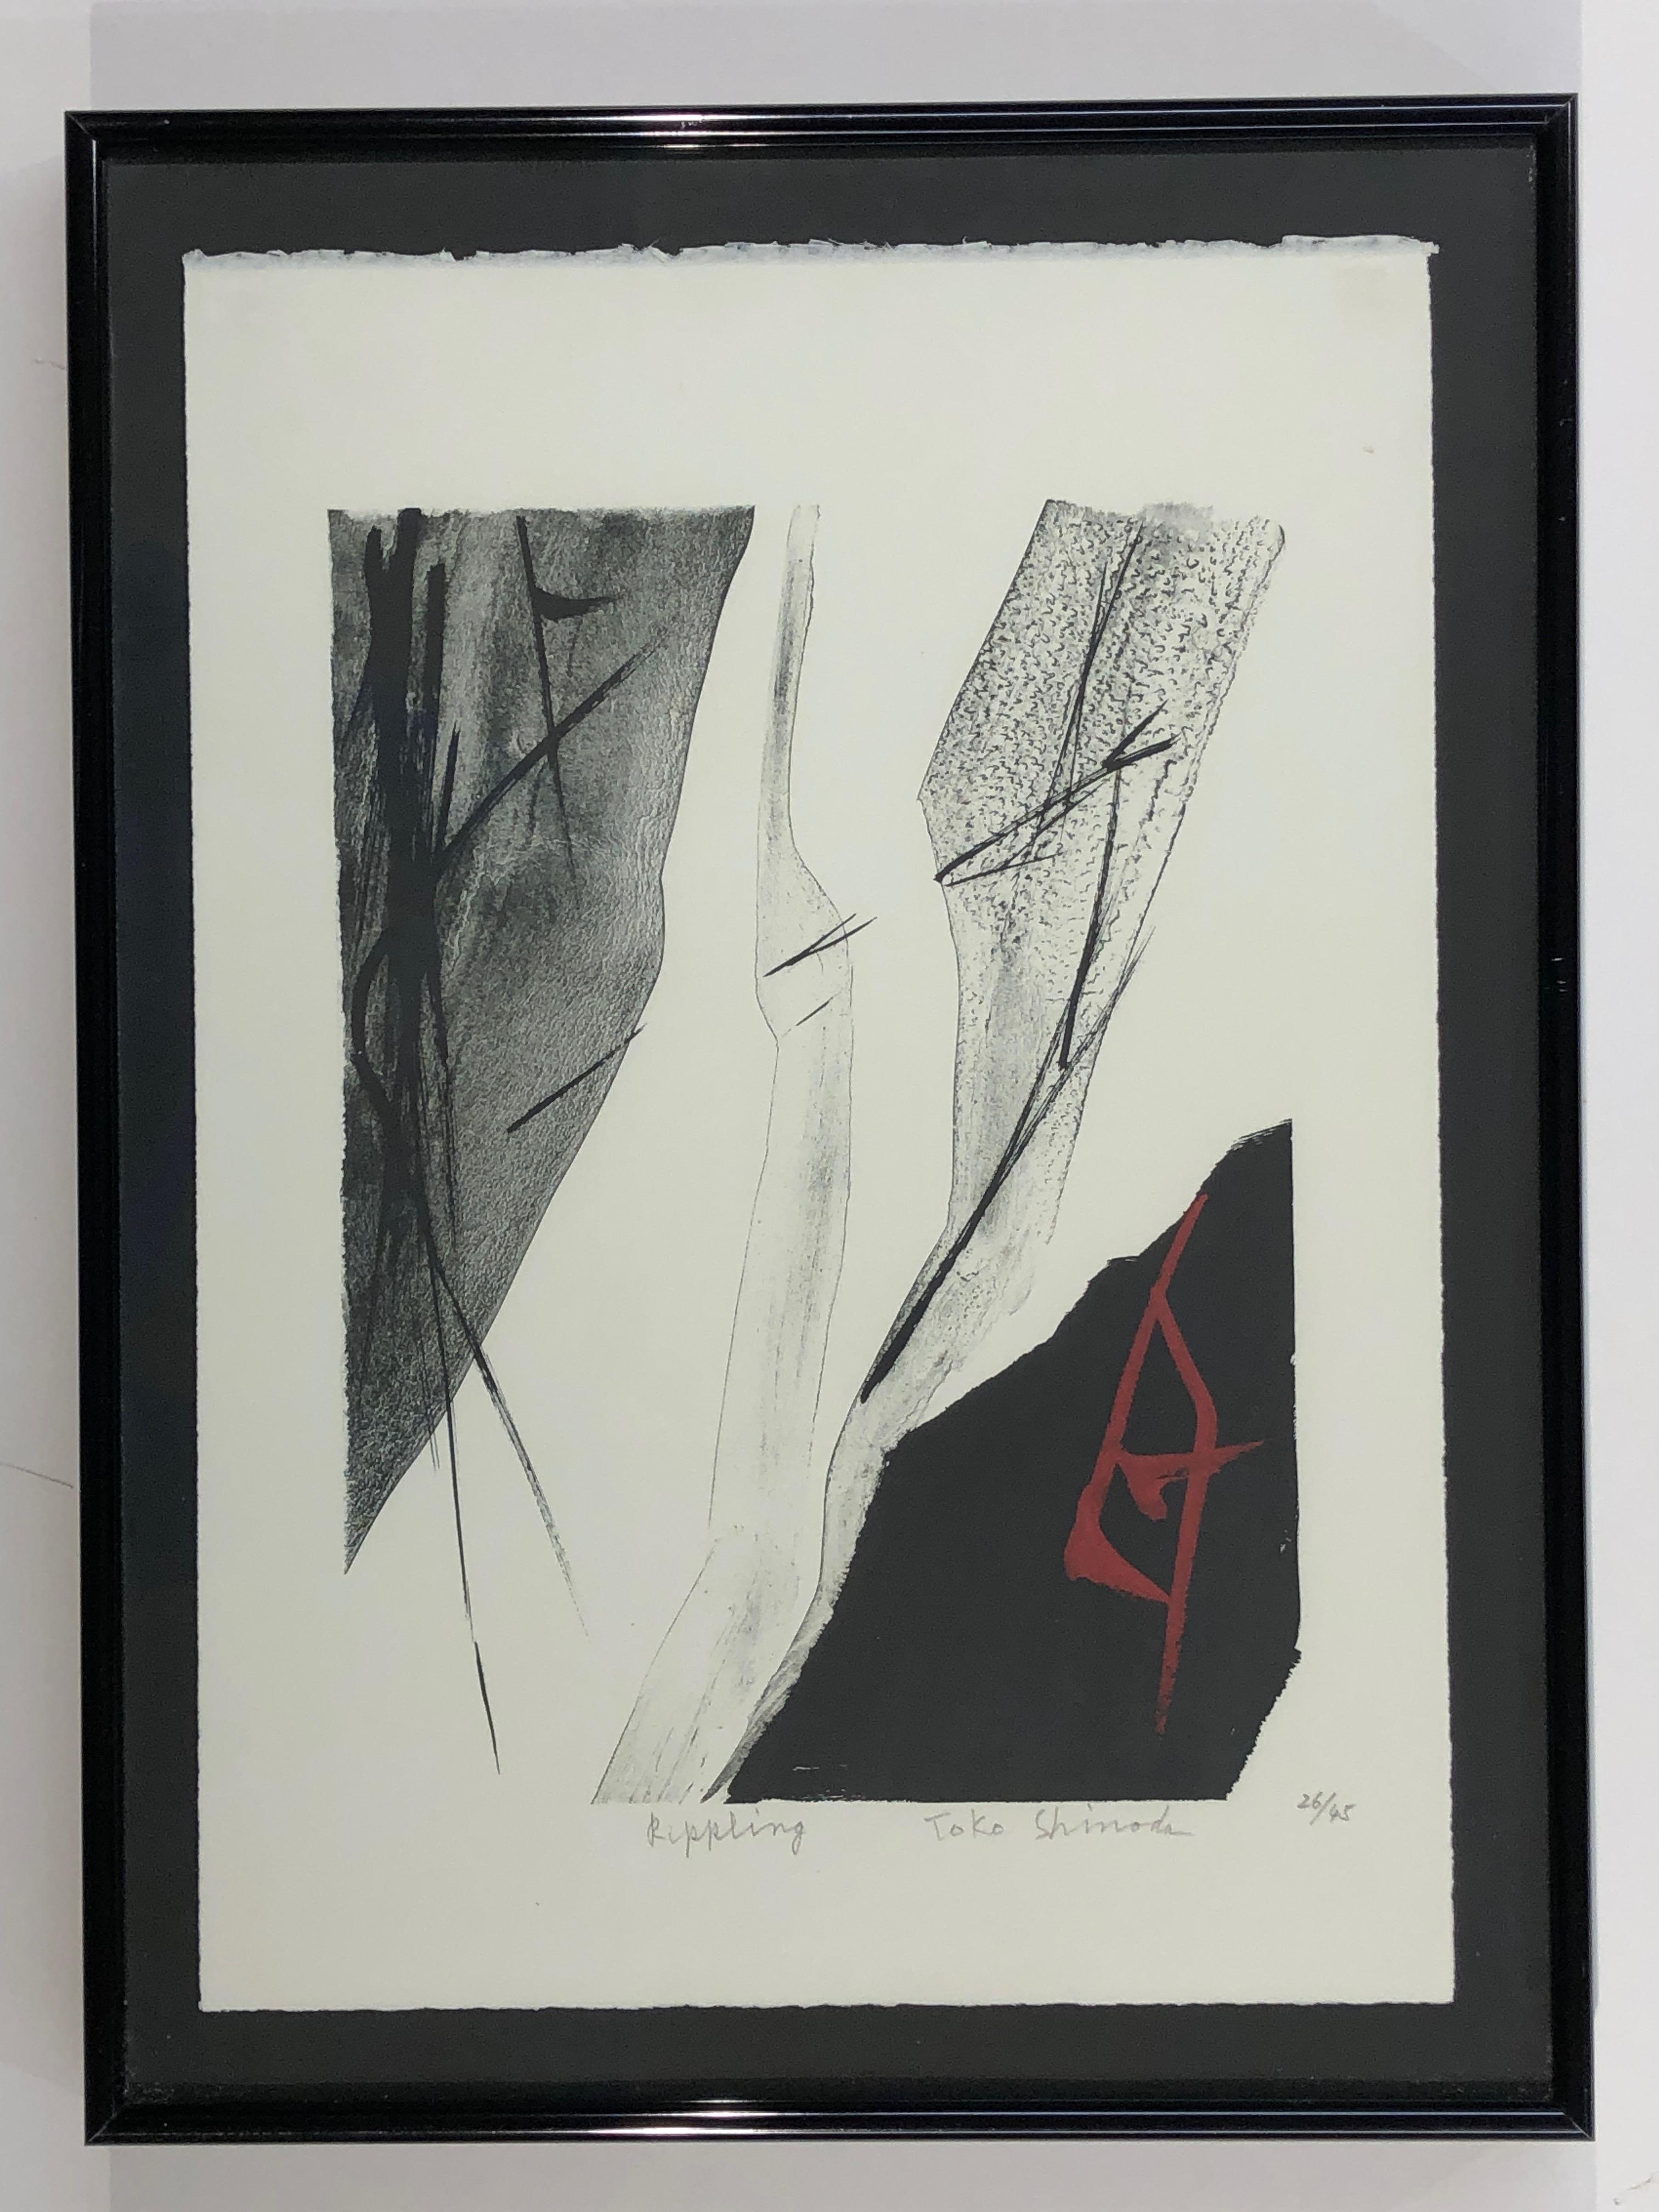 Rippling, limited edition lithograph, Japanese, black, white, red, signed